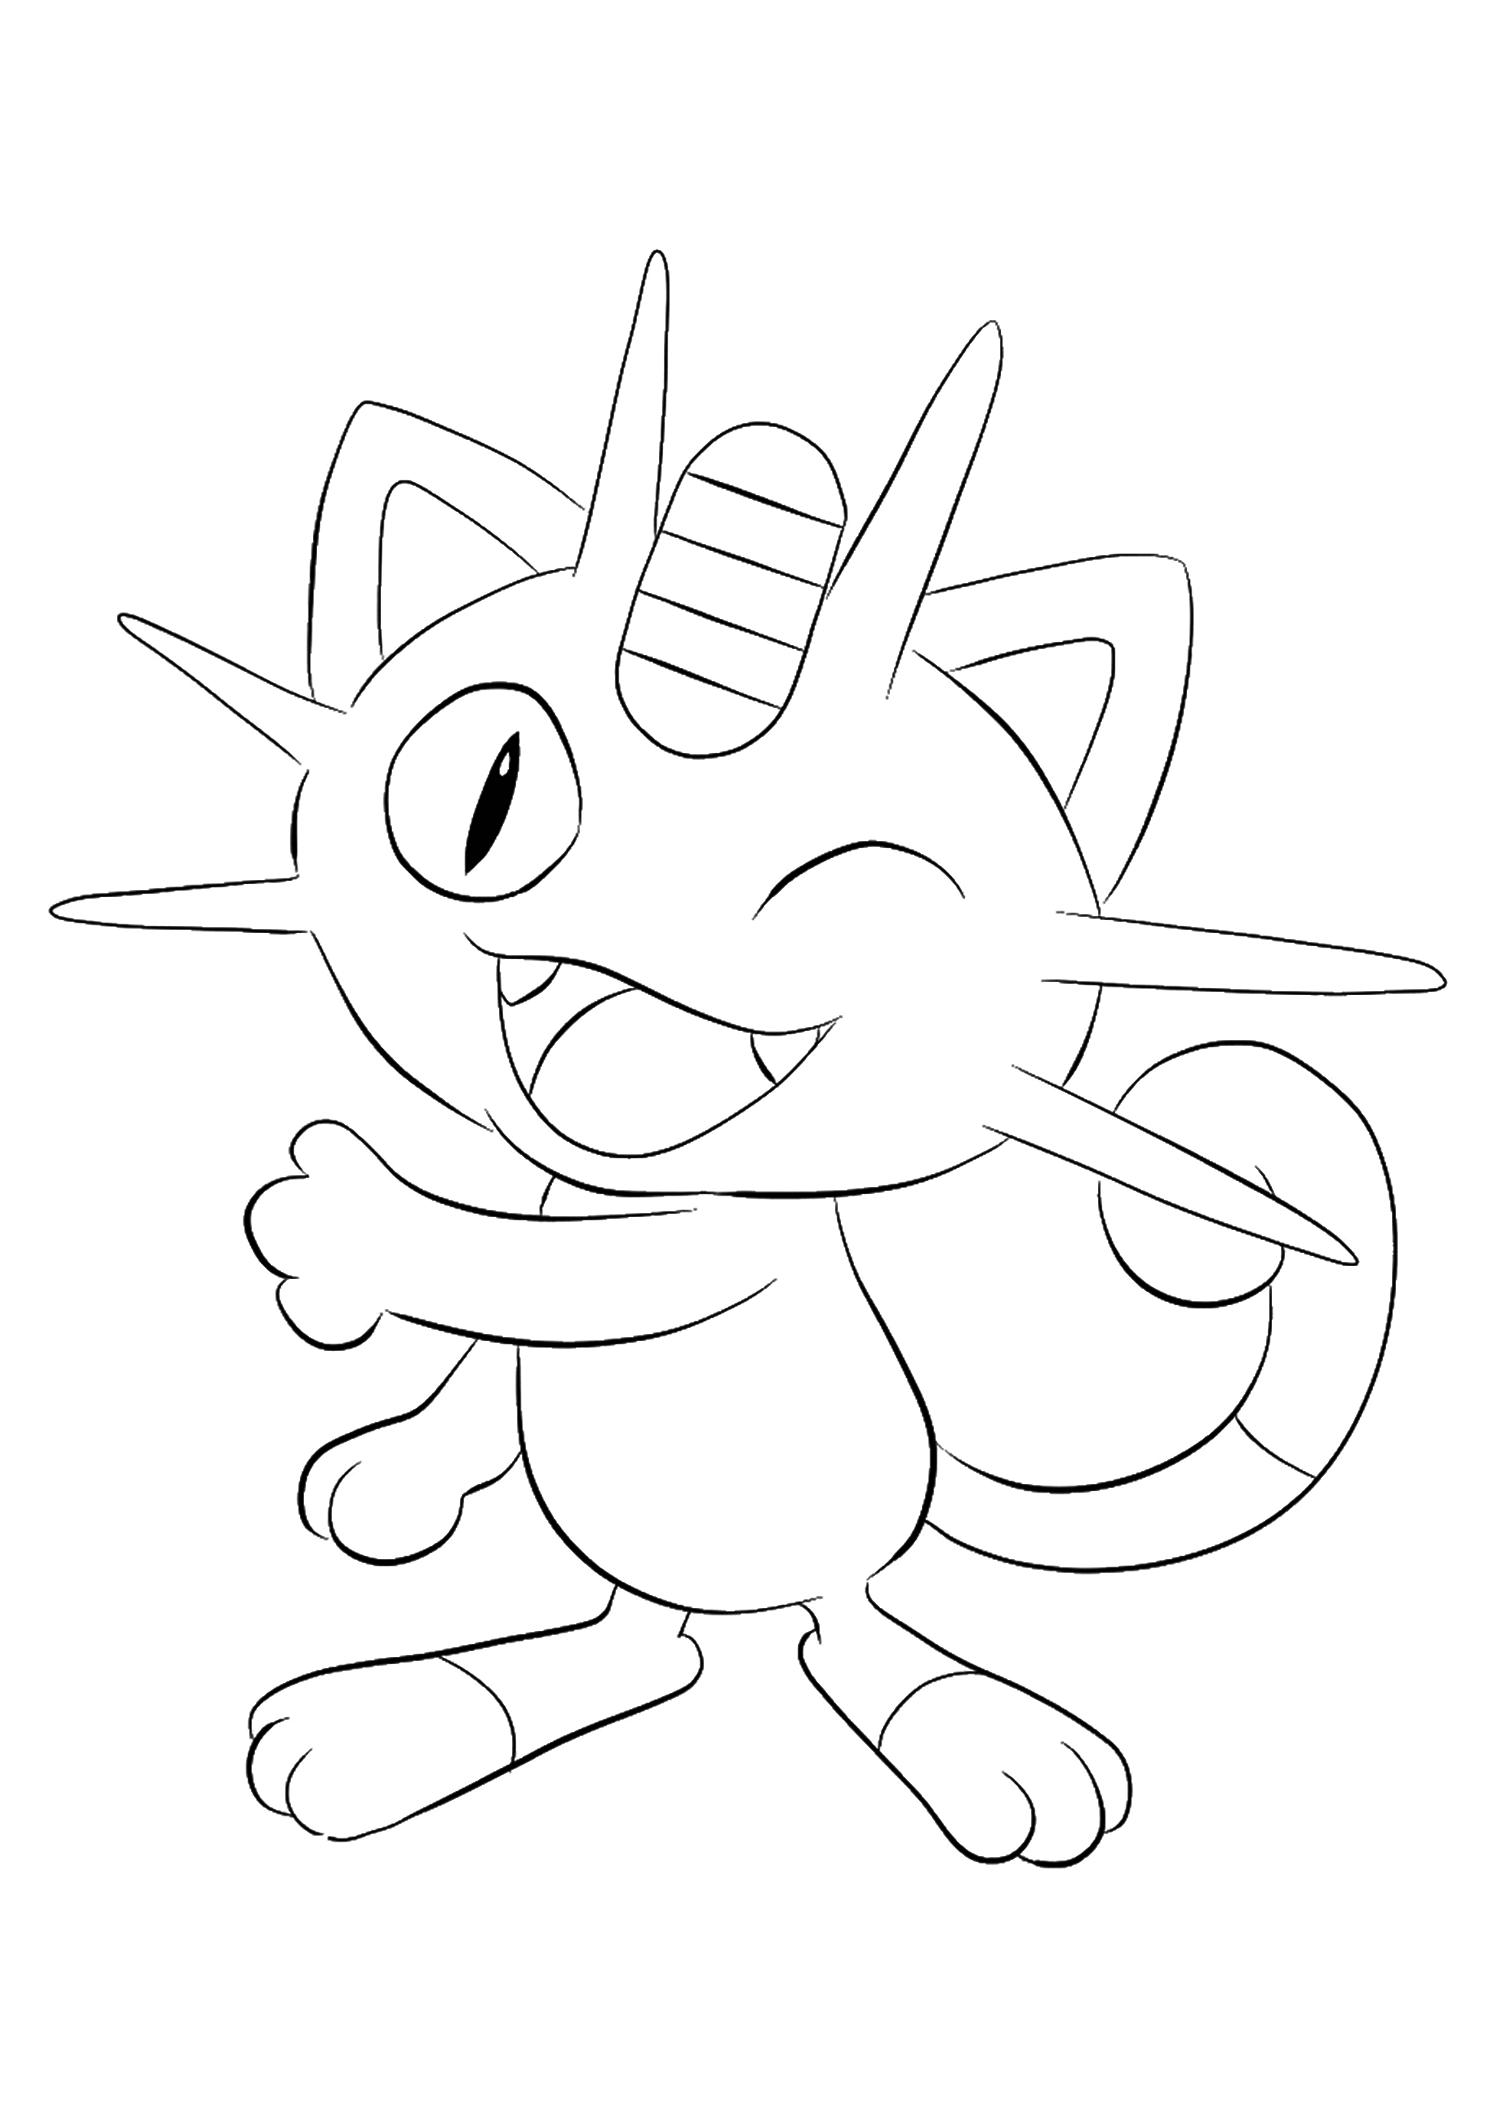 meowth no 52 pokemon generation i all pokemon coloring pages kids coloring pages